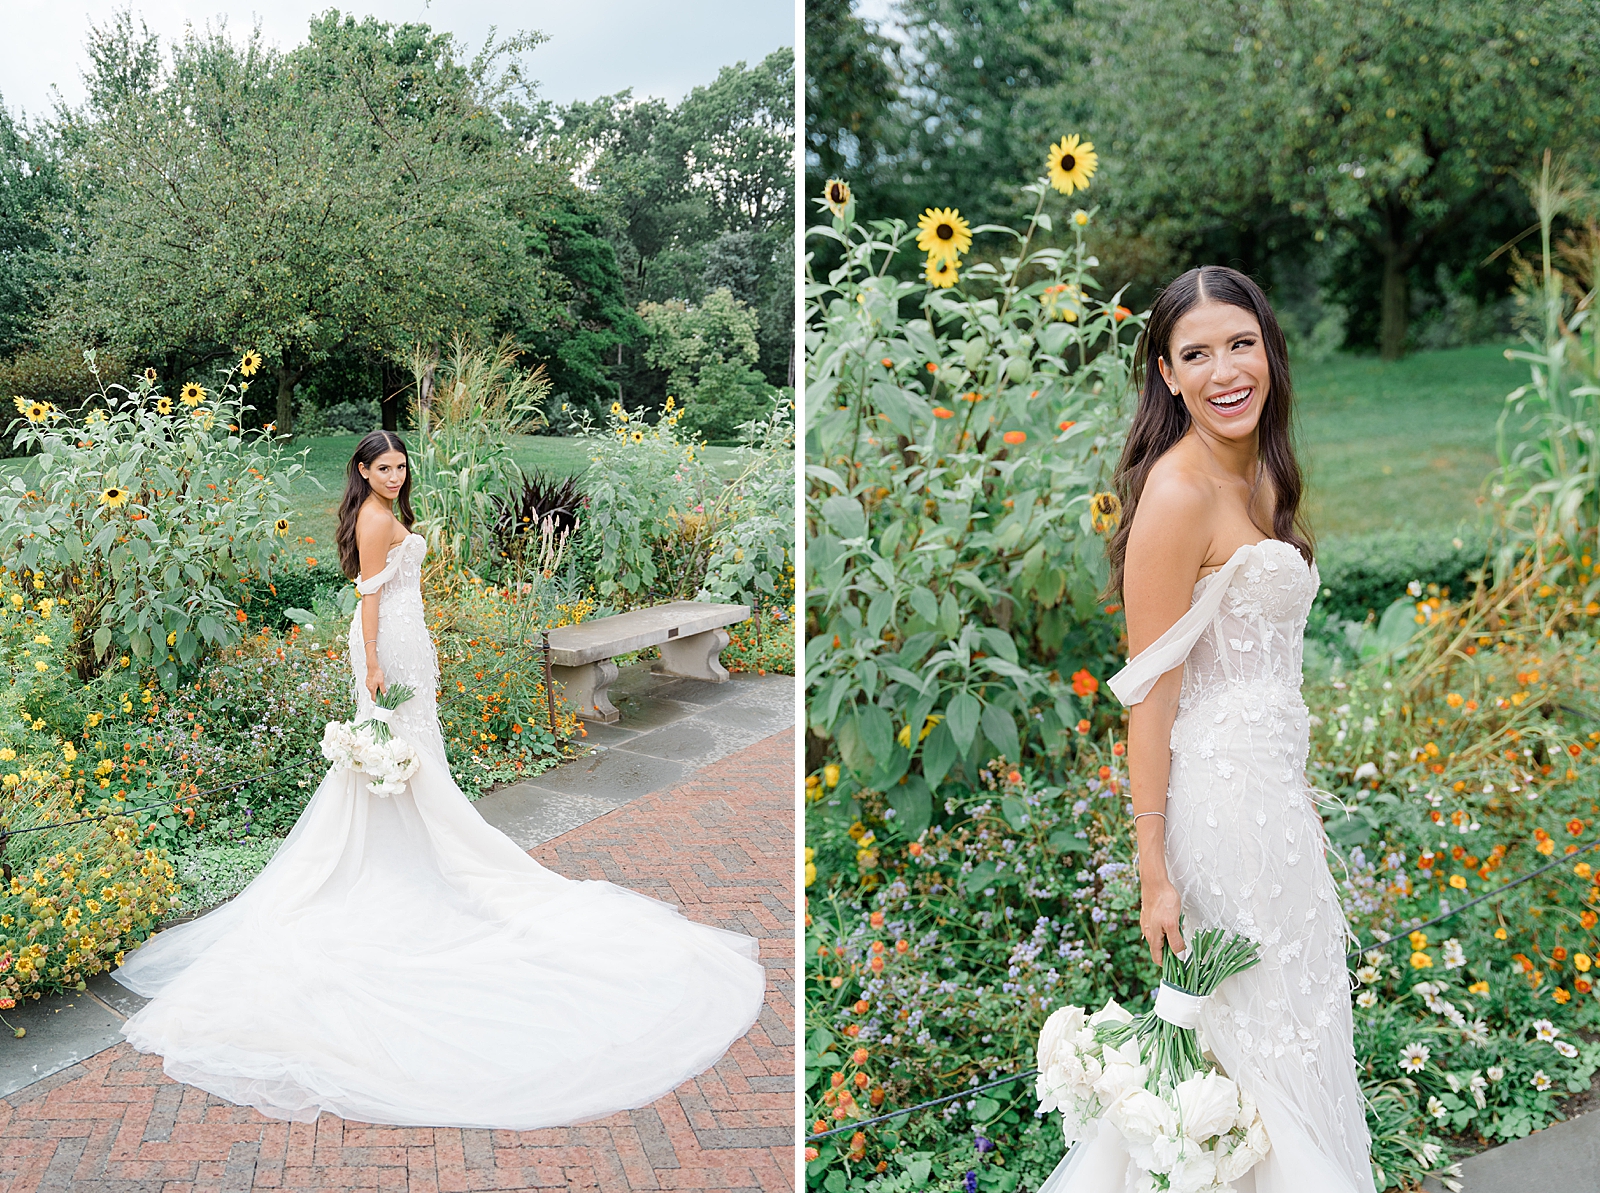 Left photo: Full body shot of the bride posing in her wedding gown with her bouquet in front of flowers.
Right photo: The bride is all smiles as she poses in front of flowers. 